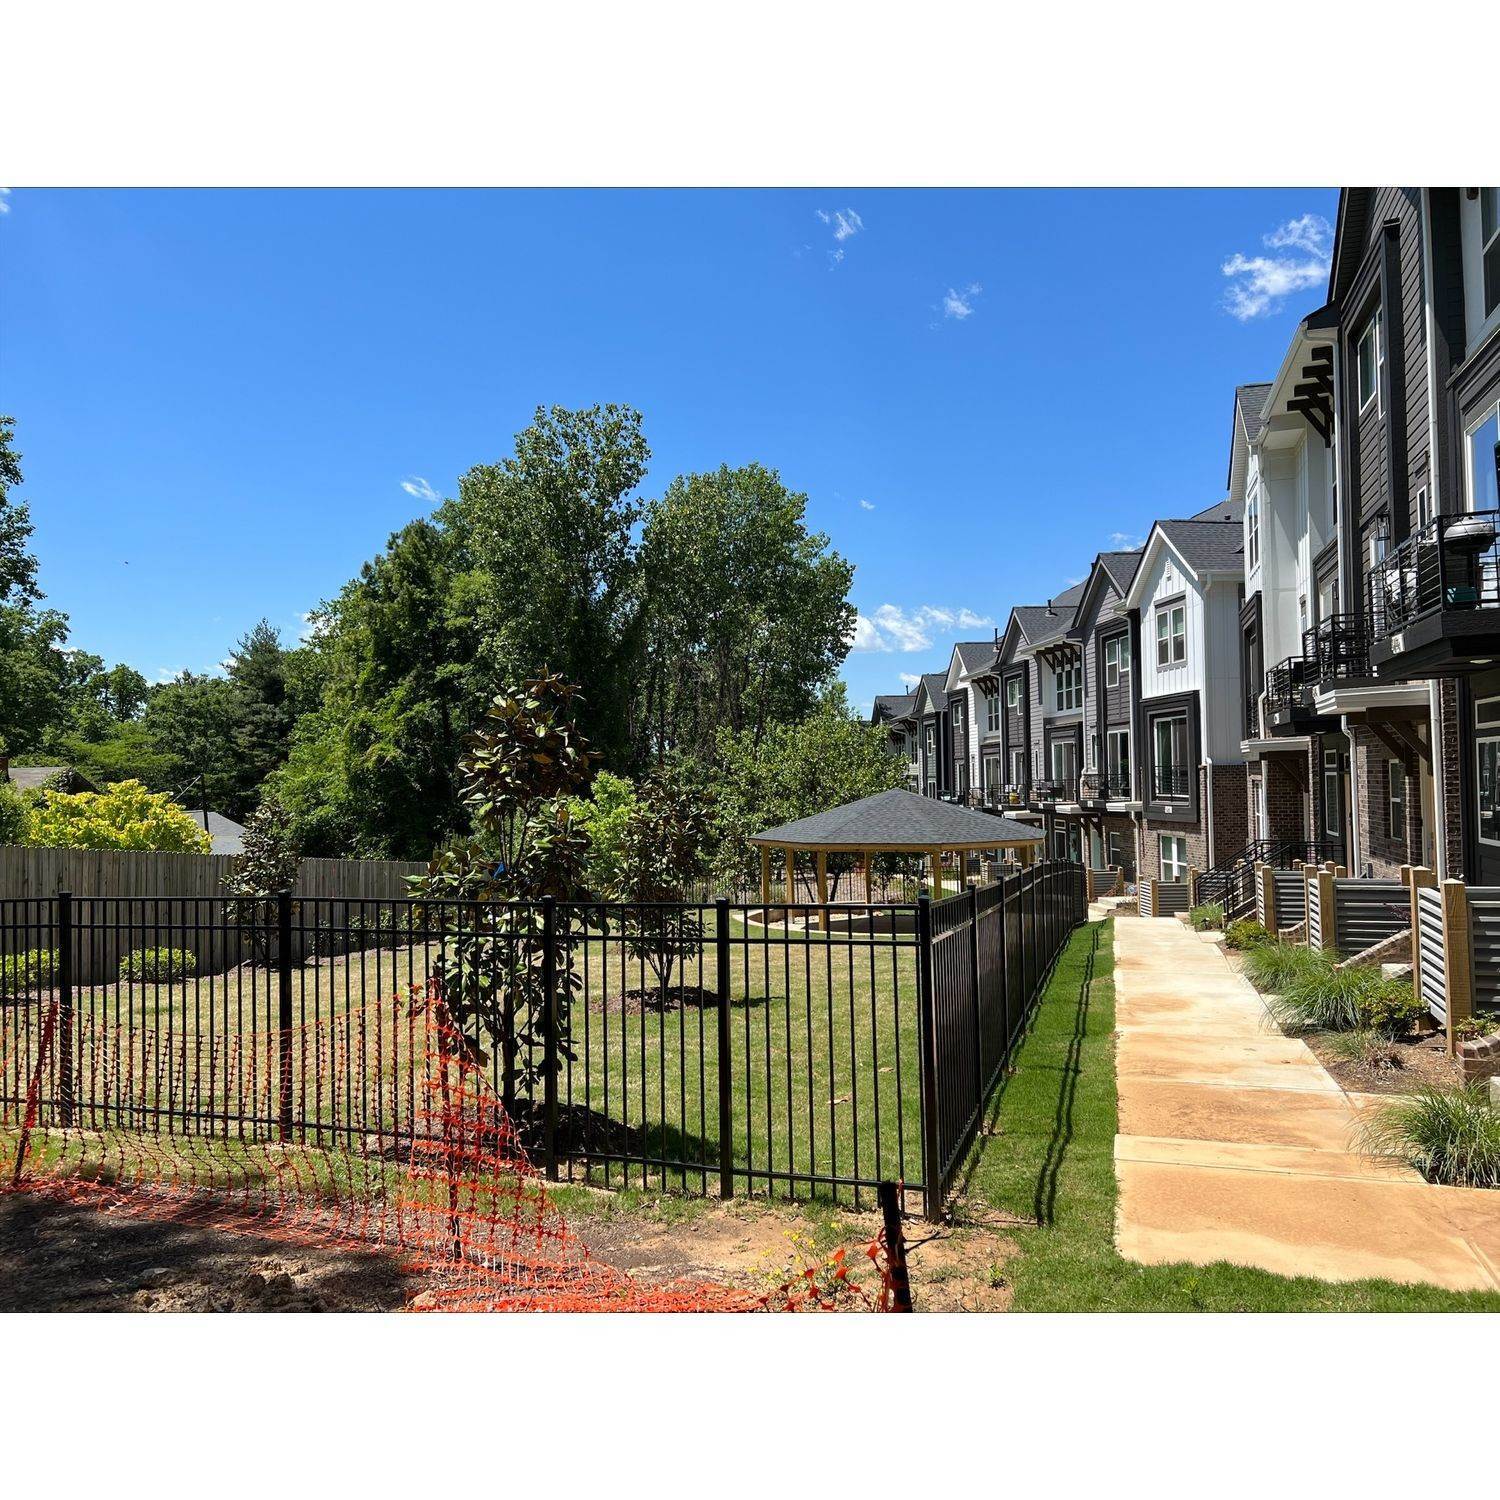 West End Towns κτίριο σε 307 S. Bruns Ave., Charlotte, NC 28208